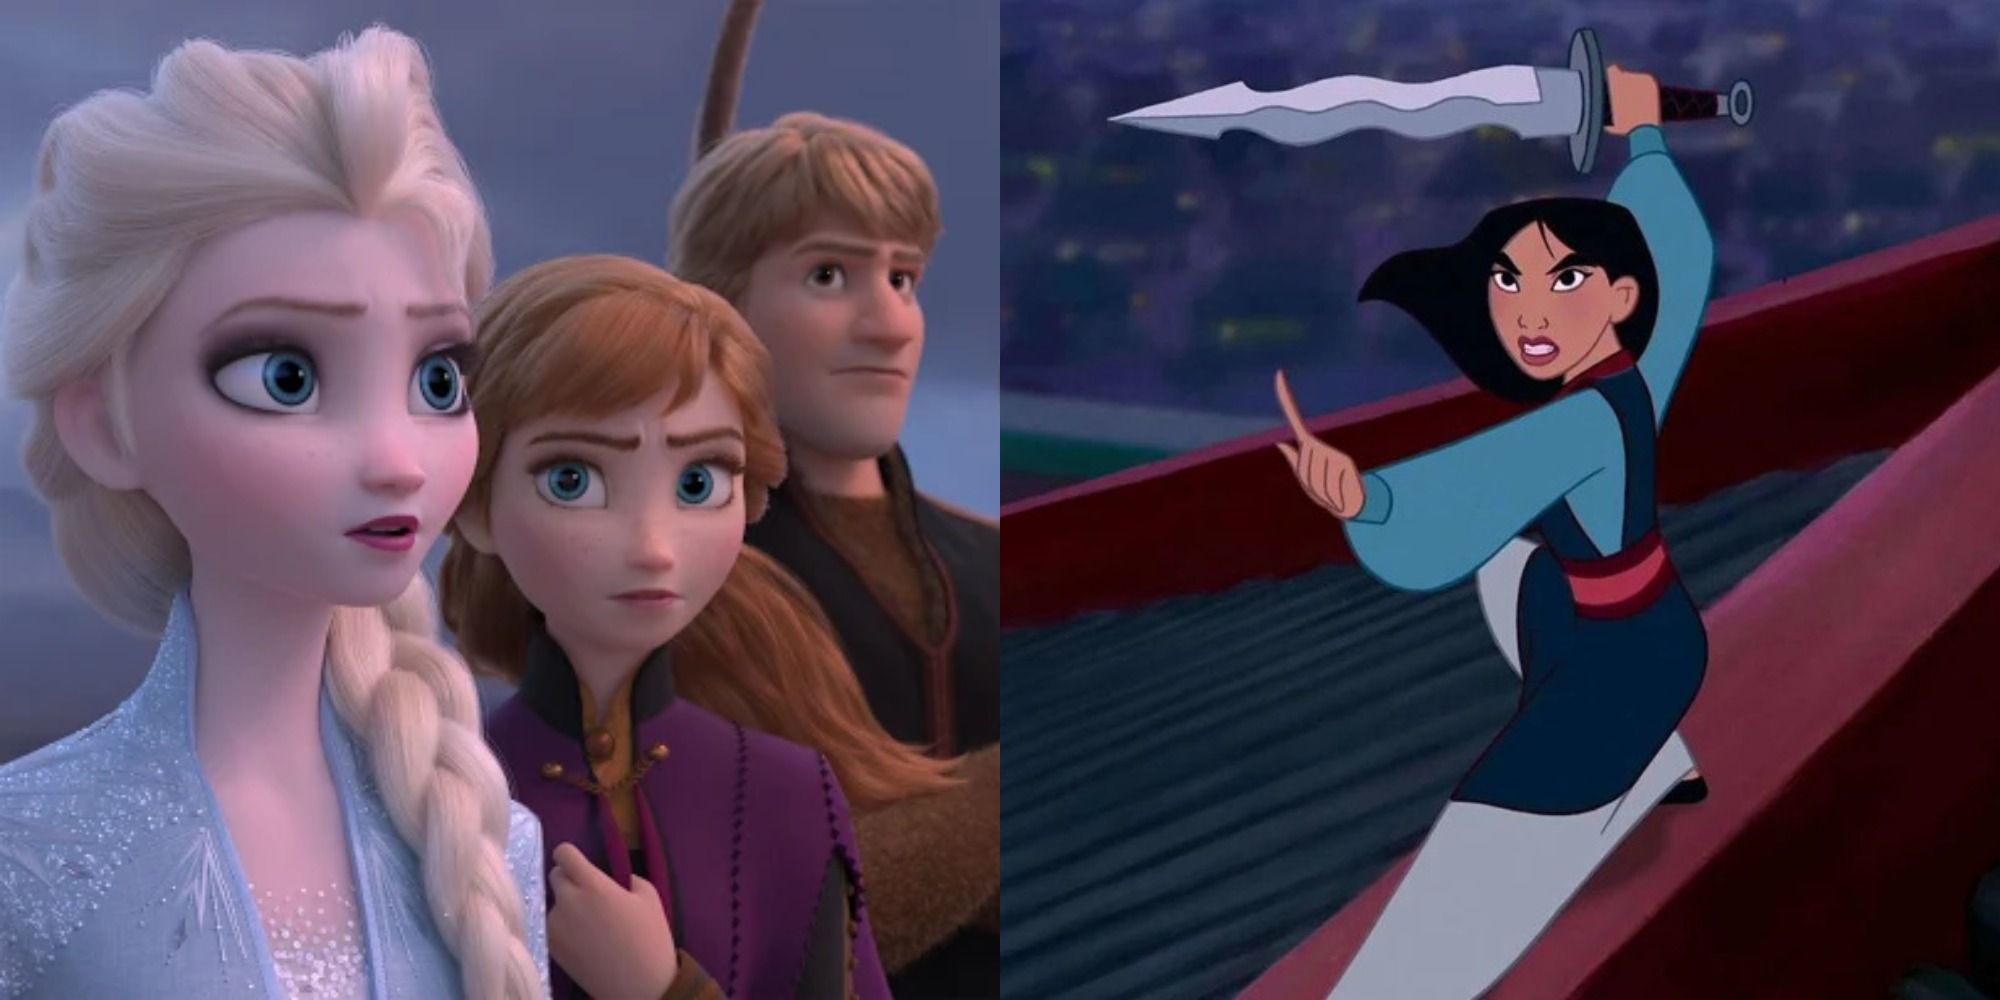 Split image depicting Elsa, Anna, and Kristoff in Frozen II, and Mulan holding a sword in the original 1998 film